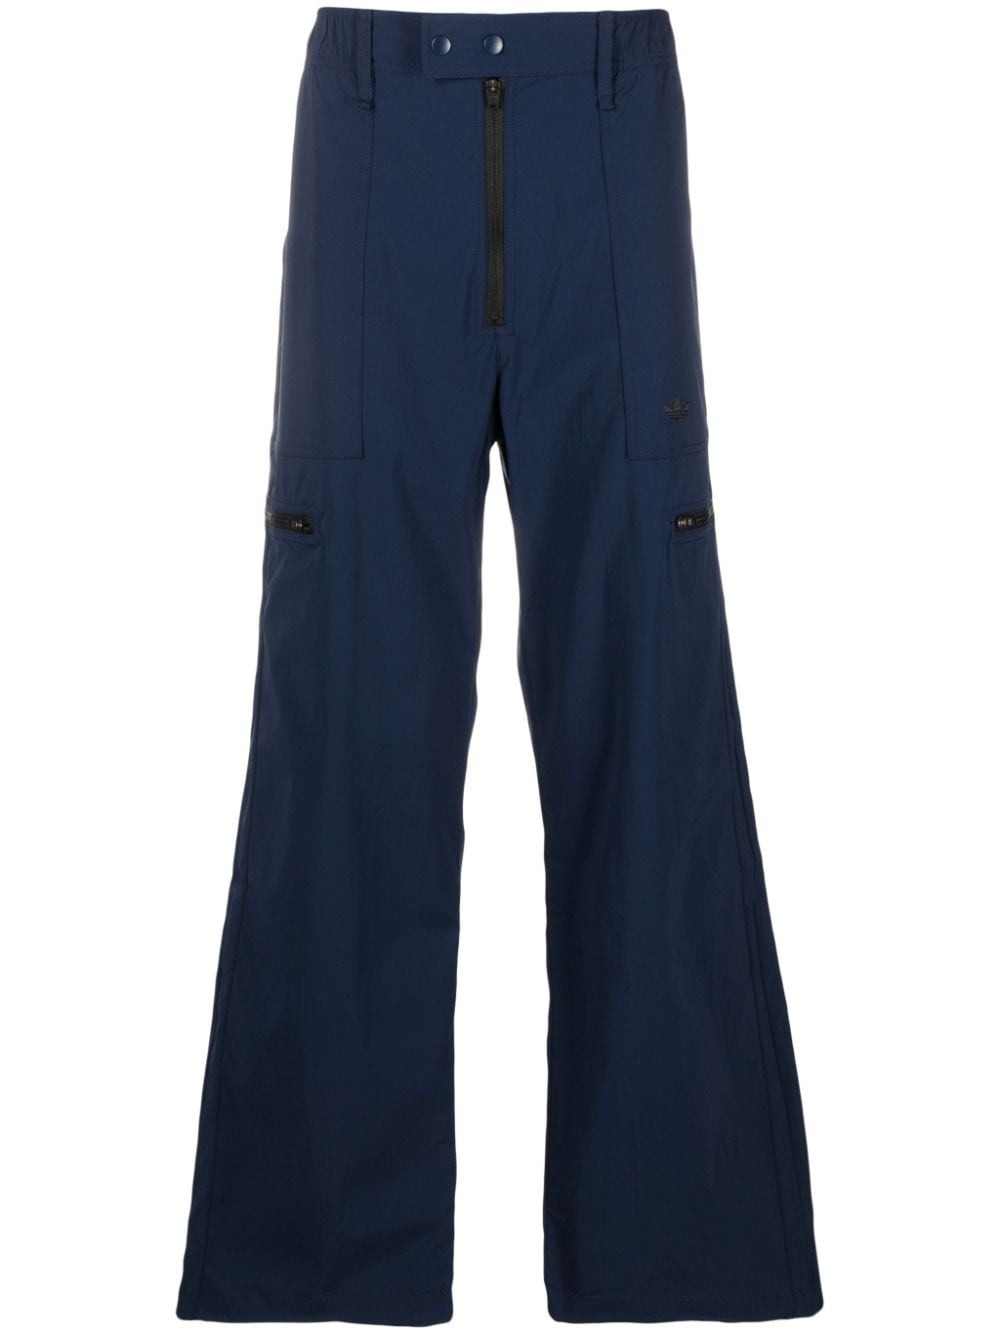 Shop Adidas Originals X Wales Bonner Embroidered Logo Cargo Trousers In Blue